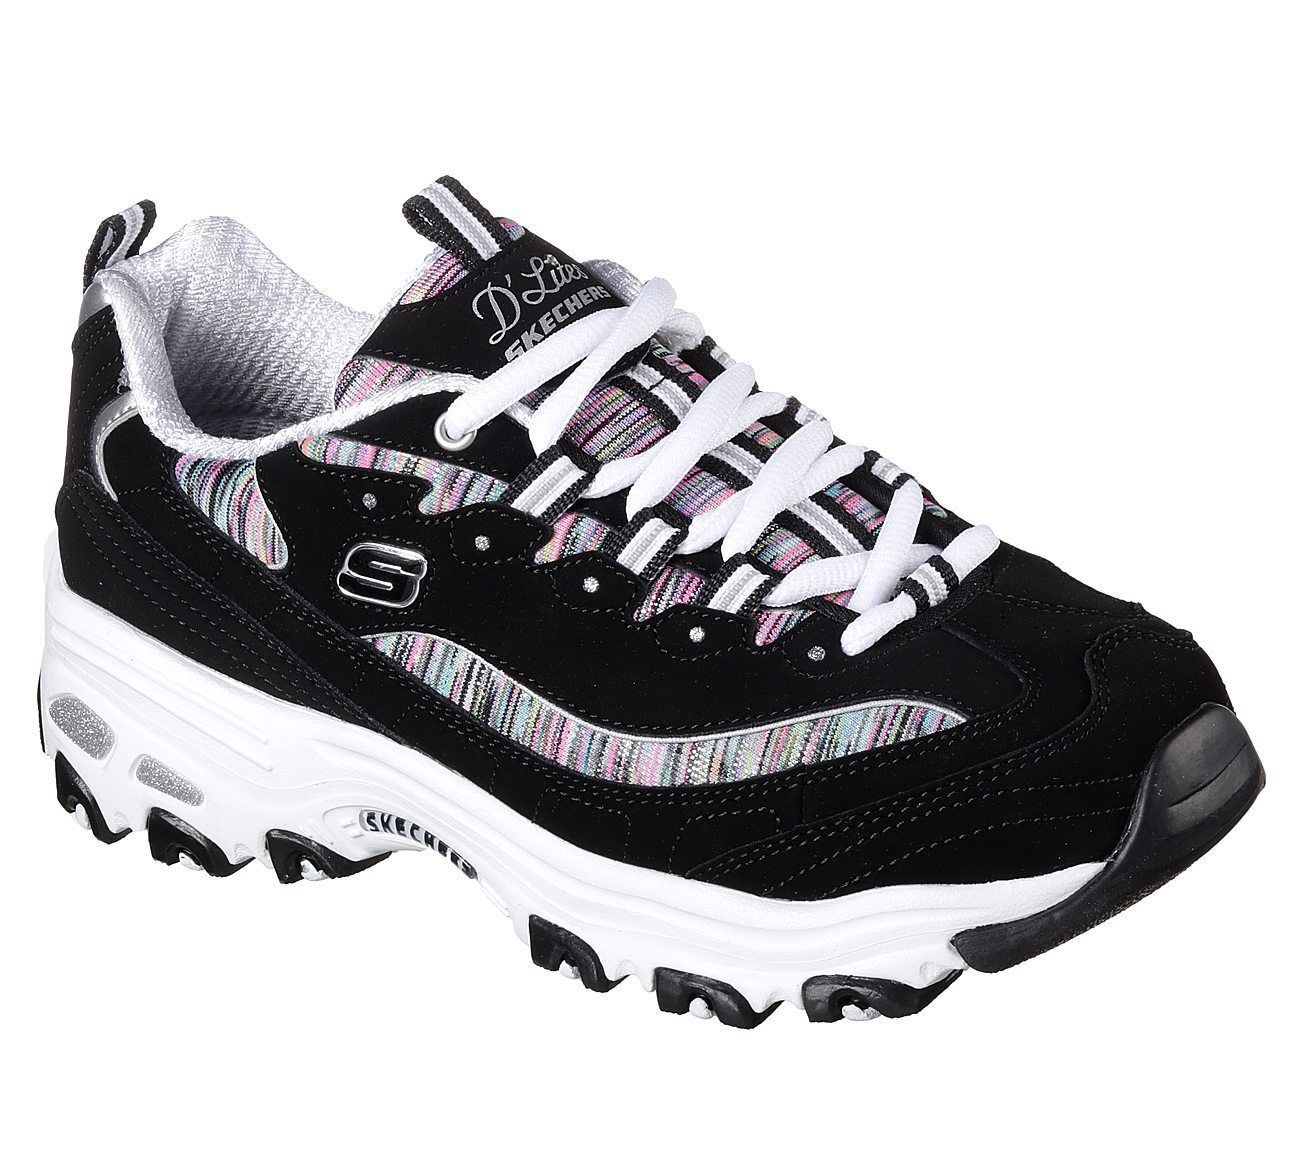 skechers lace up sneakers mujer 2015